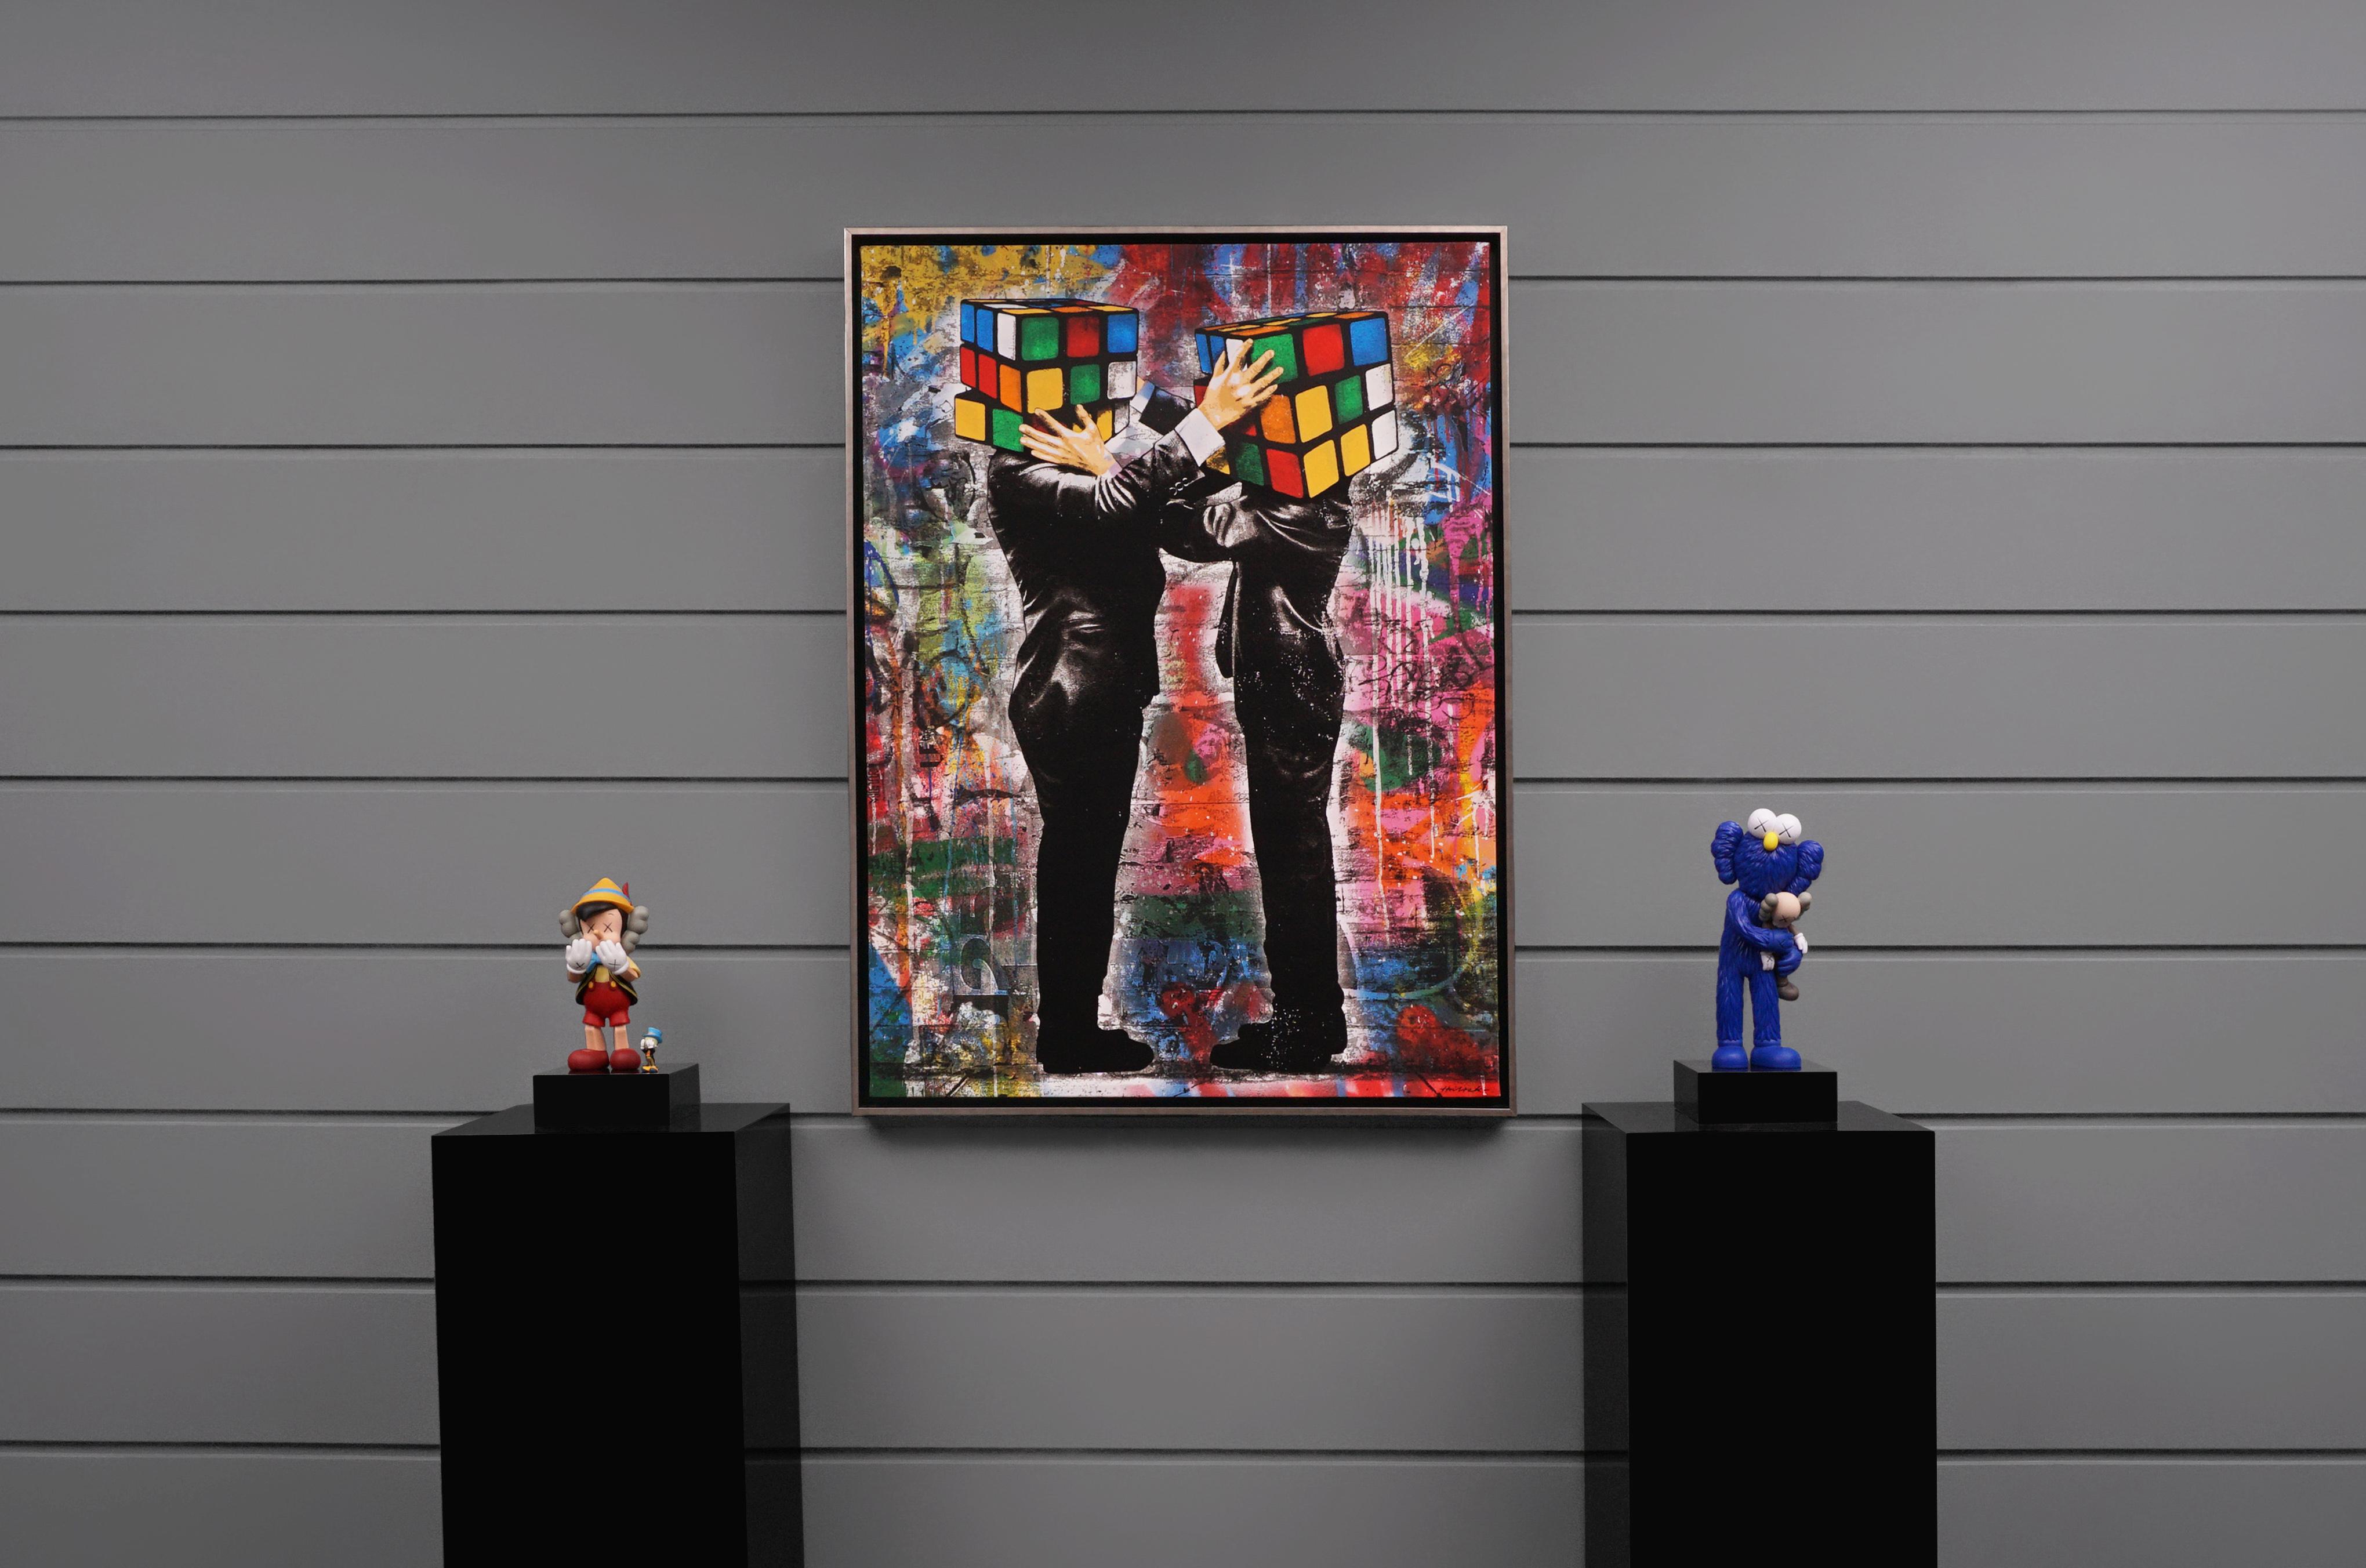 The street pop artwork ‘Puzzled III' on canvas with stenciled graffiti by contemporary street-artist prodigy Hijack, reflects the political and cultural divide in today’s society.  The mulit-color silkscreen, acrylic, and mixed media pop art